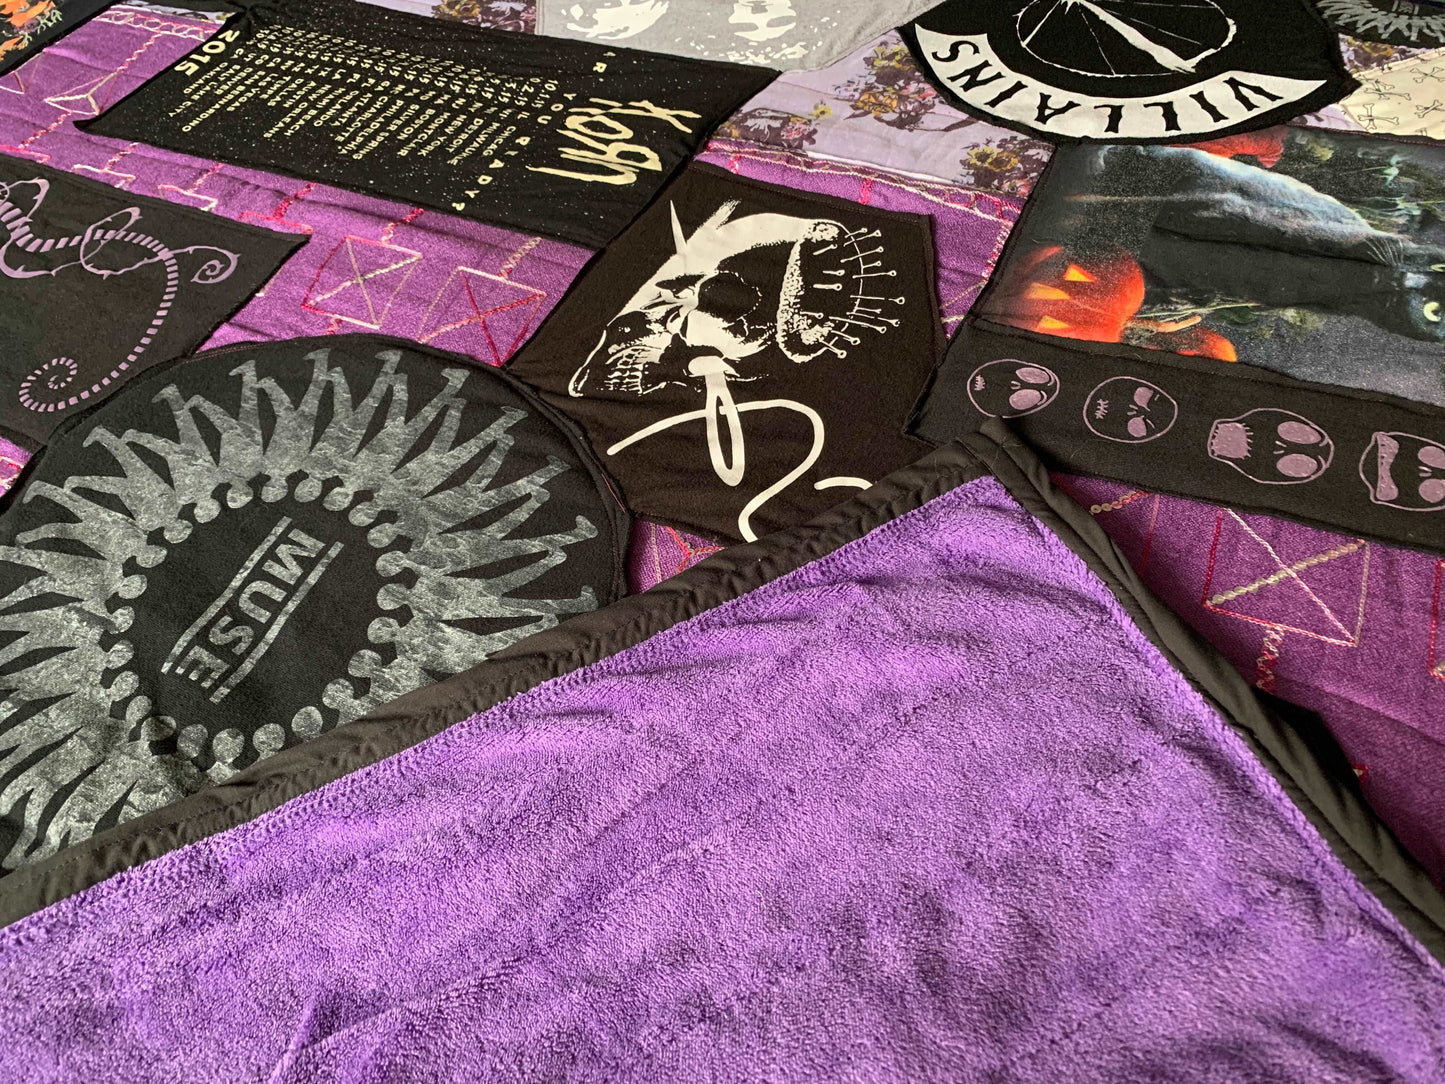 A purple and black tshirt quilt, with a corner folded over to show off the plush fuzzy backing in purple.